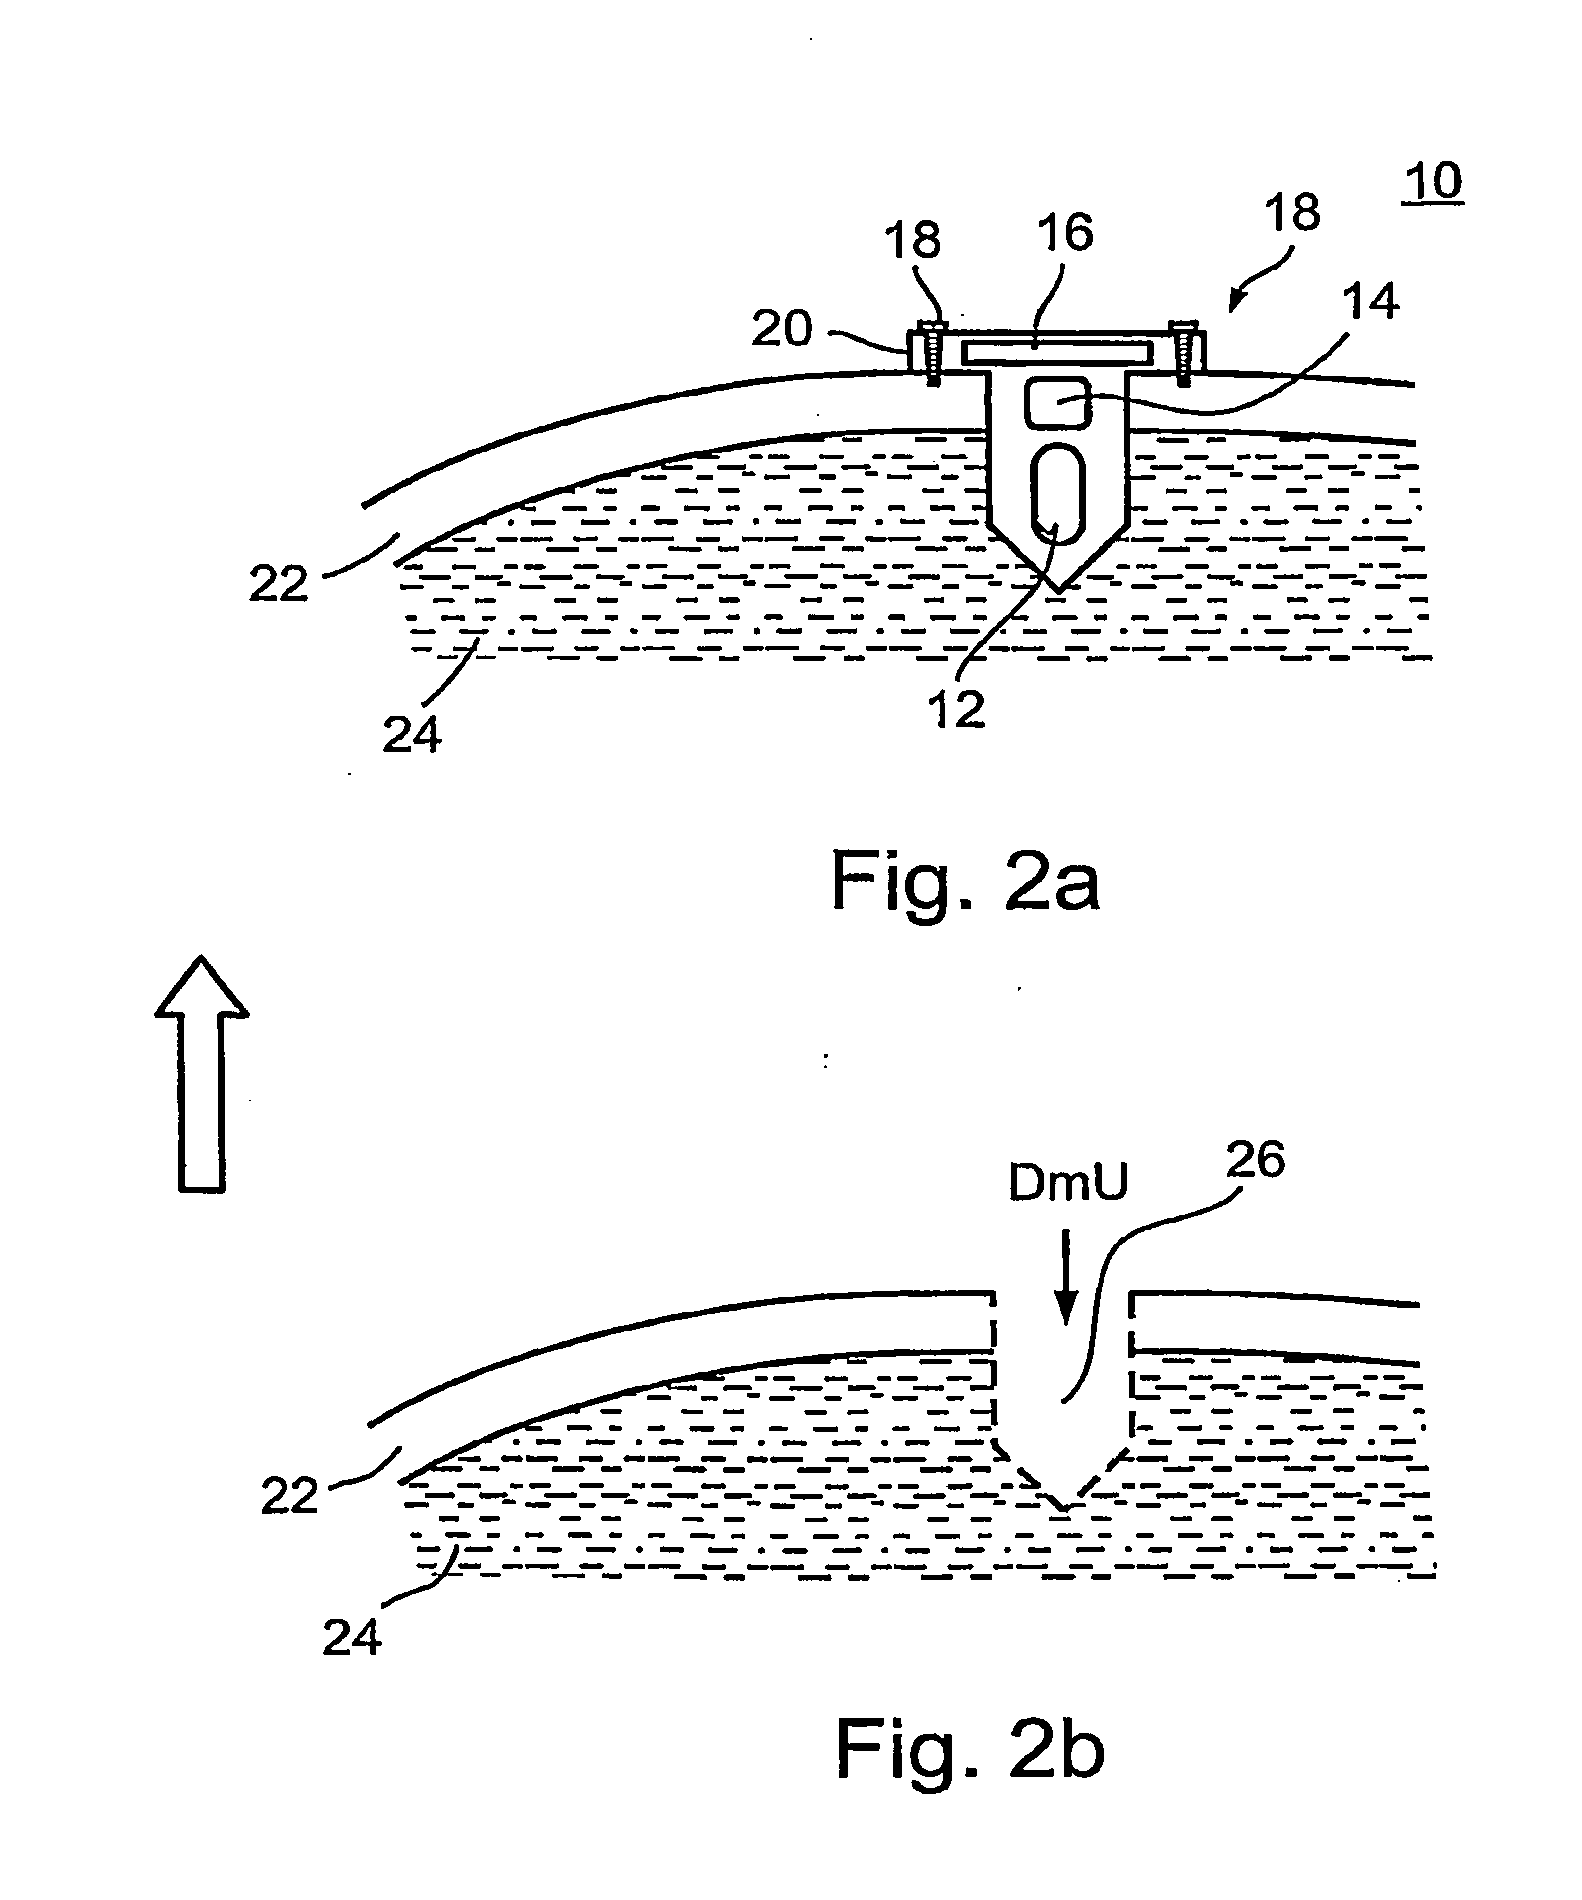 Device system and method for monitoring and controlling blood analyte levels